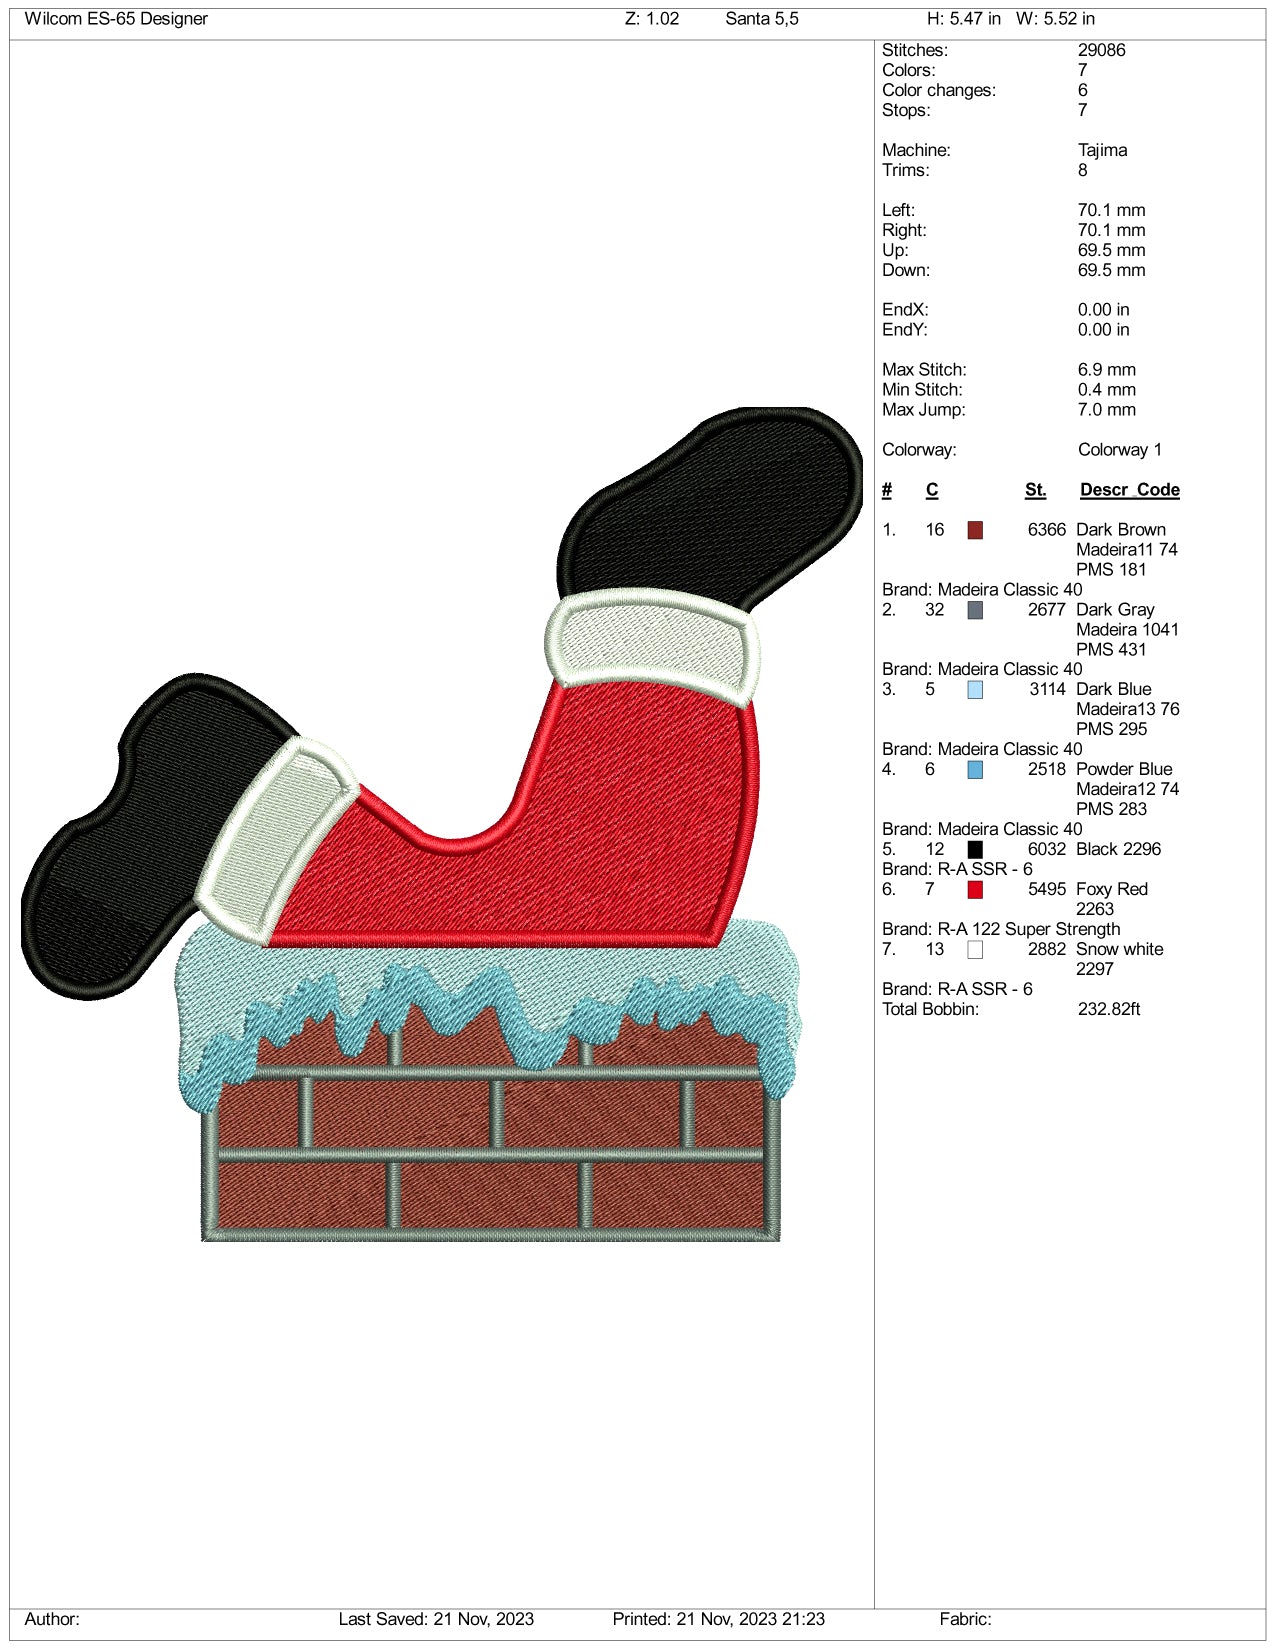 Santa In Chimney Embroidery Design Files - 3 Size's